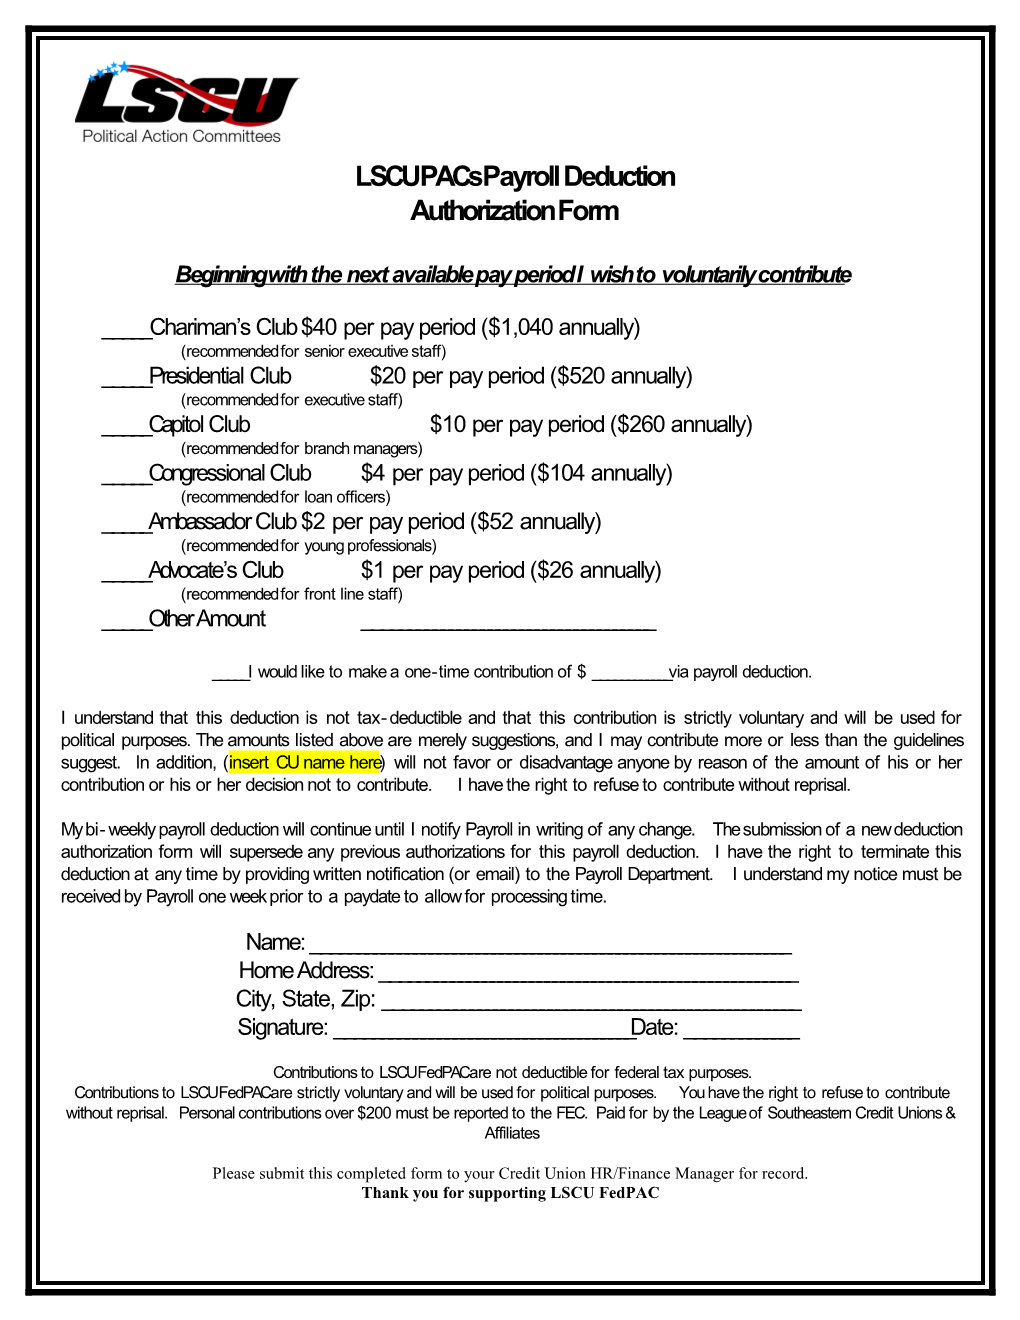 CULAC Payroll Deduction Authorization Form